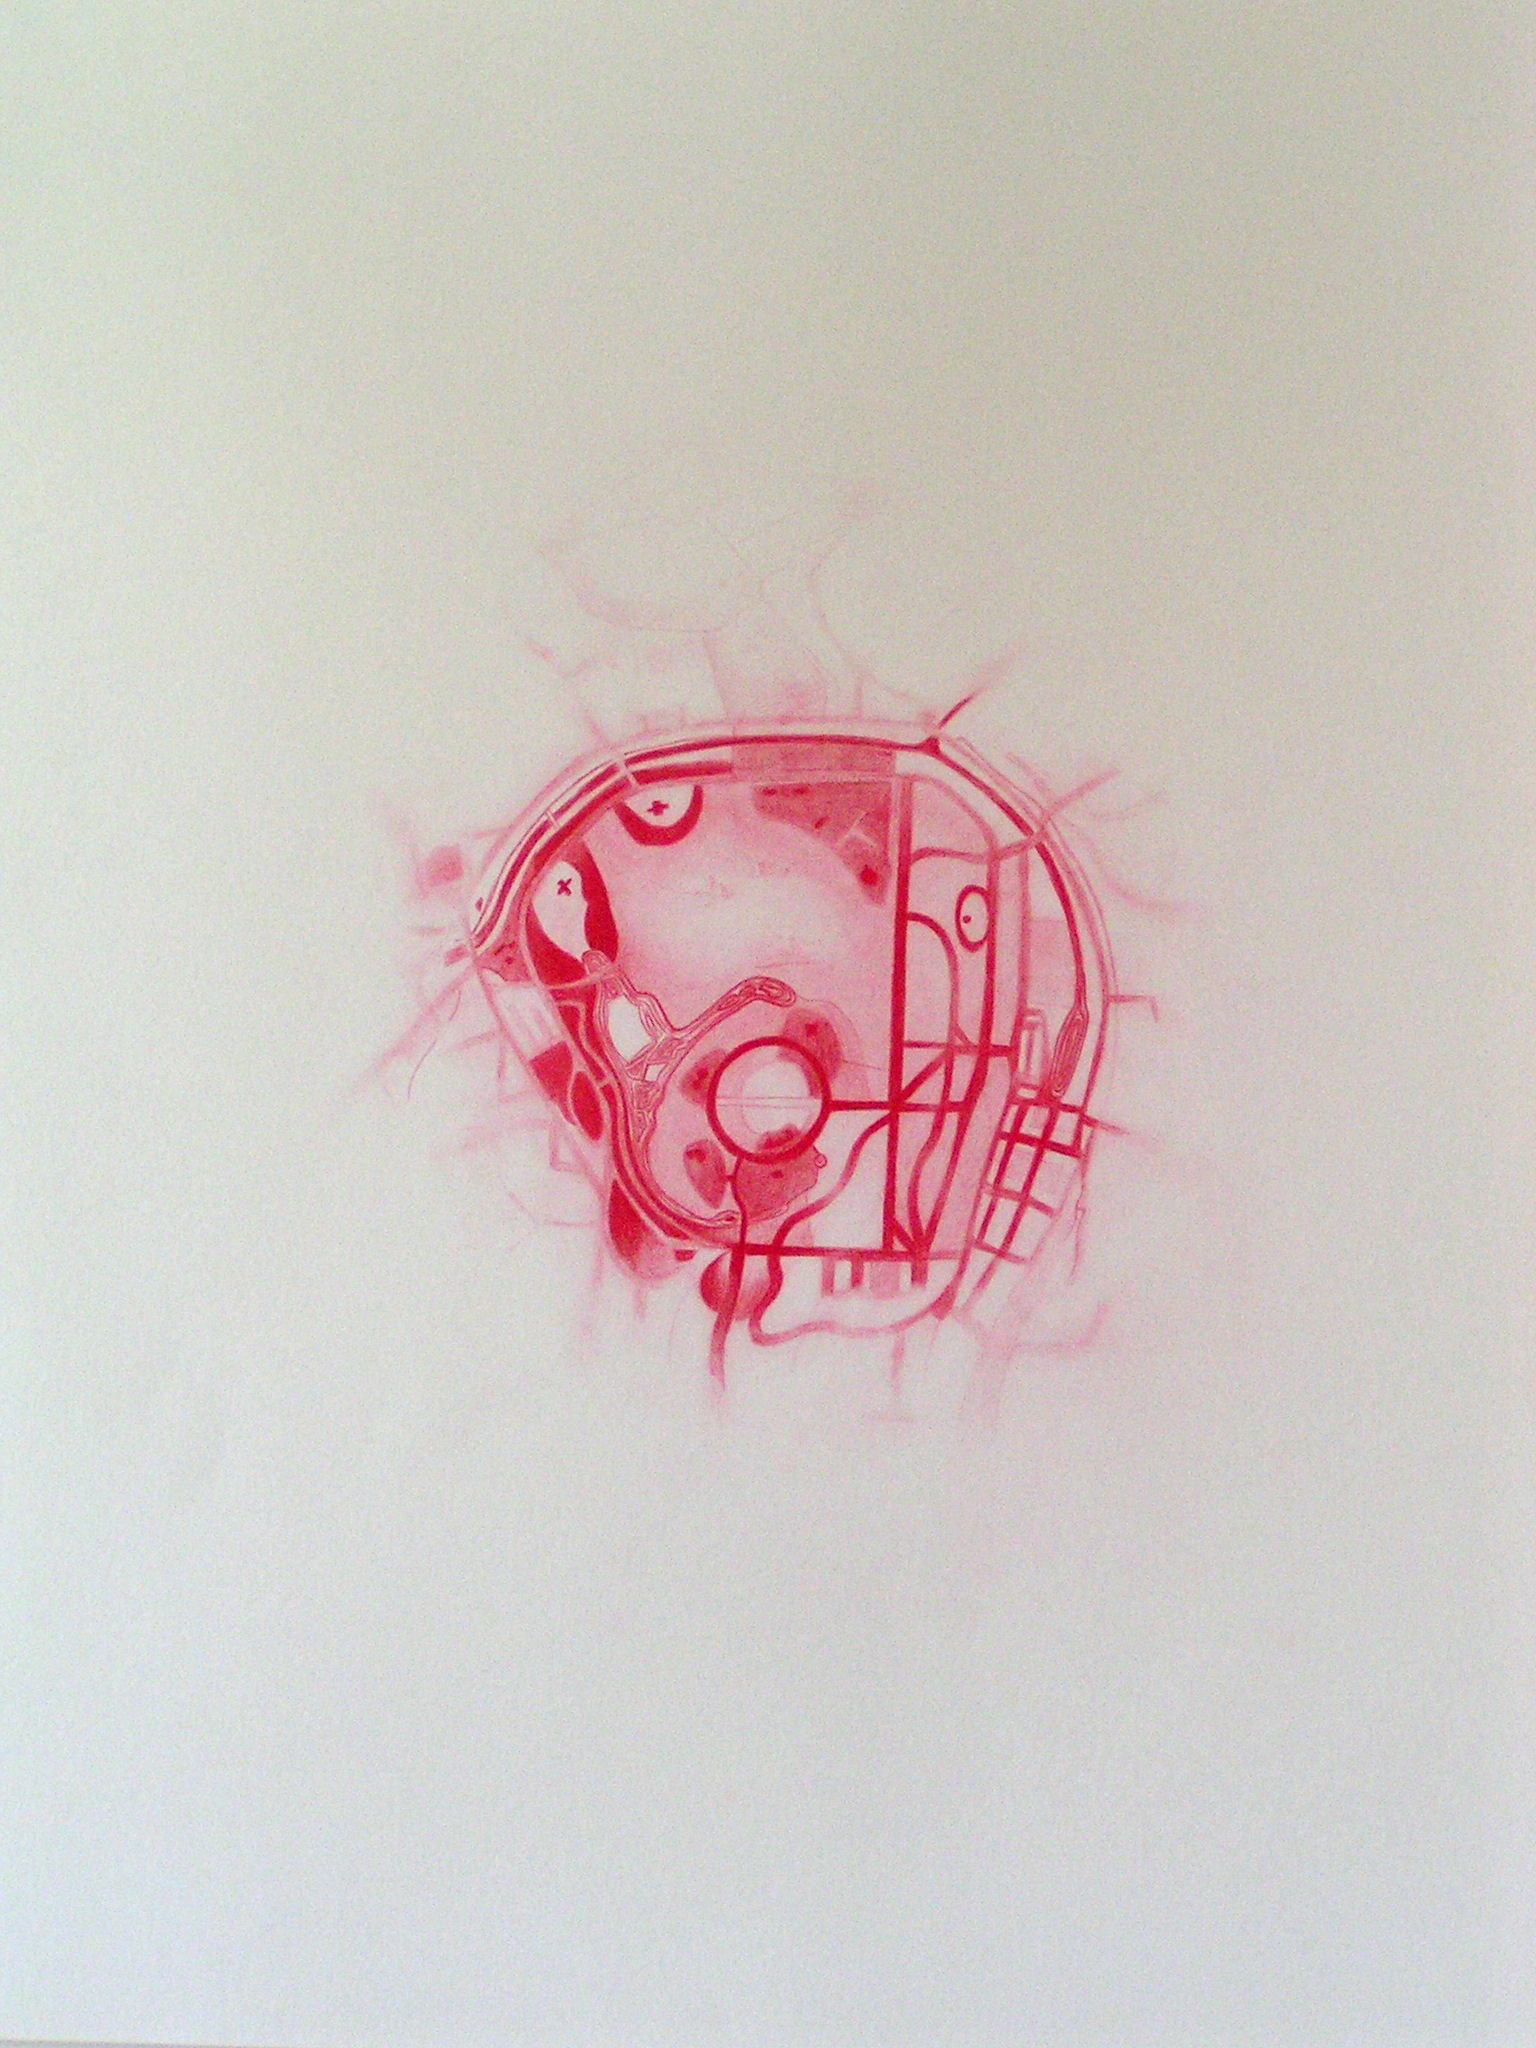 Emma J Williams 'Untitled Red Drawing No.7' 2008 pencil on paper